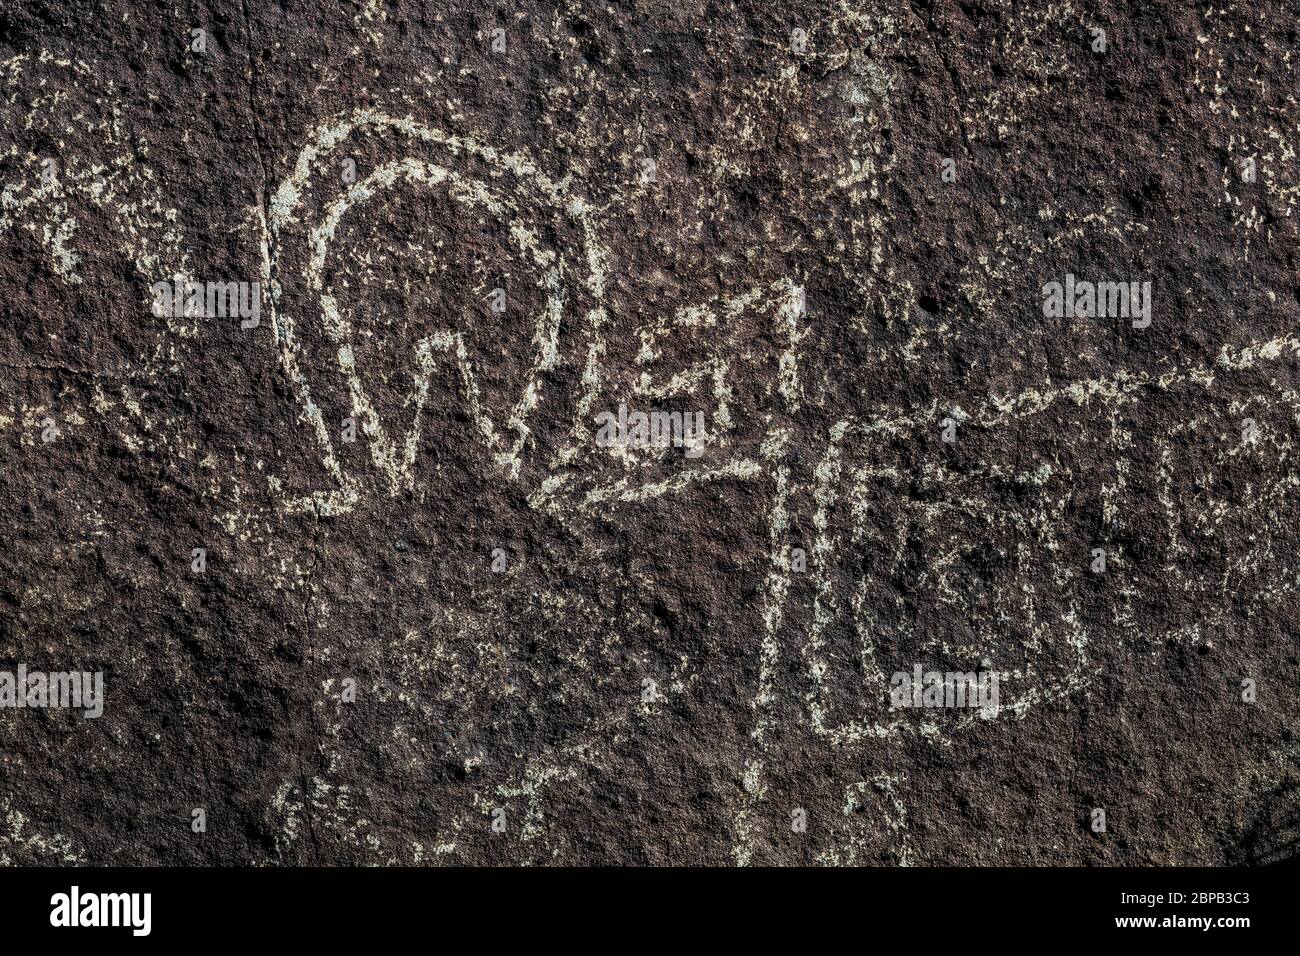 Rock art with geometric design created long ago by Jornada Mogollon people at Three Rivers Petroglyph Site in the northern Chihuahuan Desert, New Mexi Stock Photo